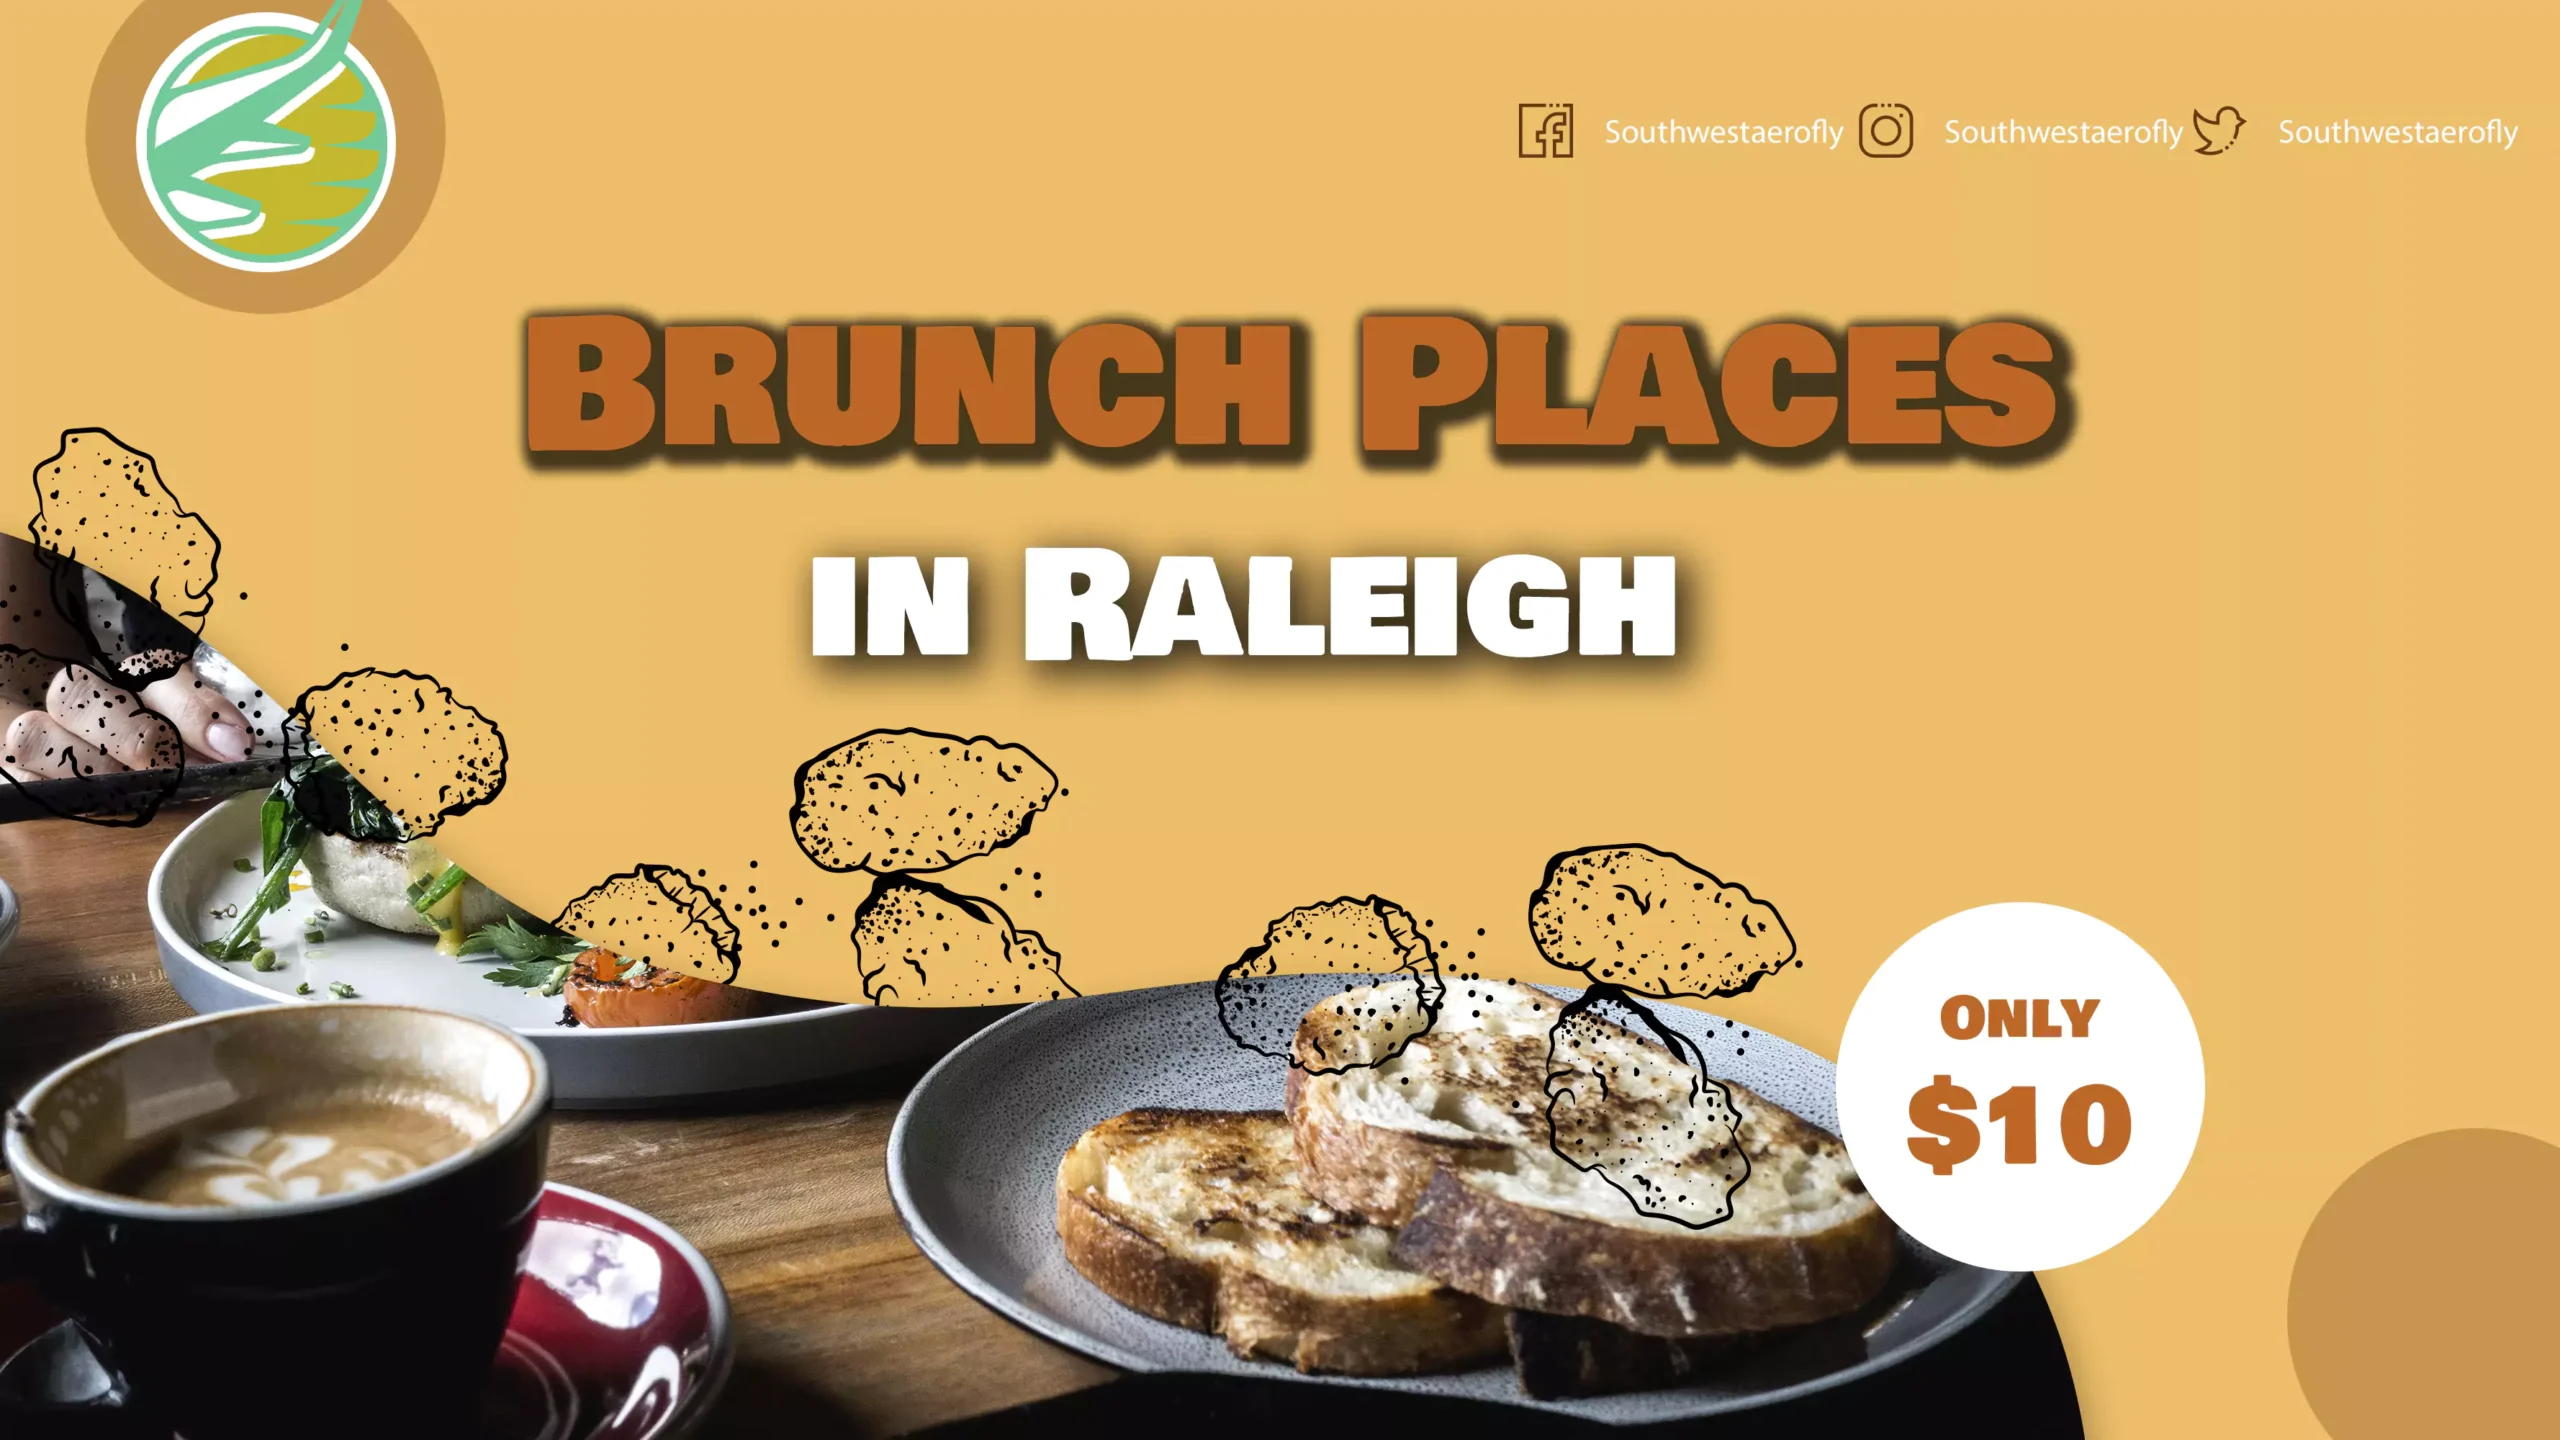 Brunch Places in Raleigh